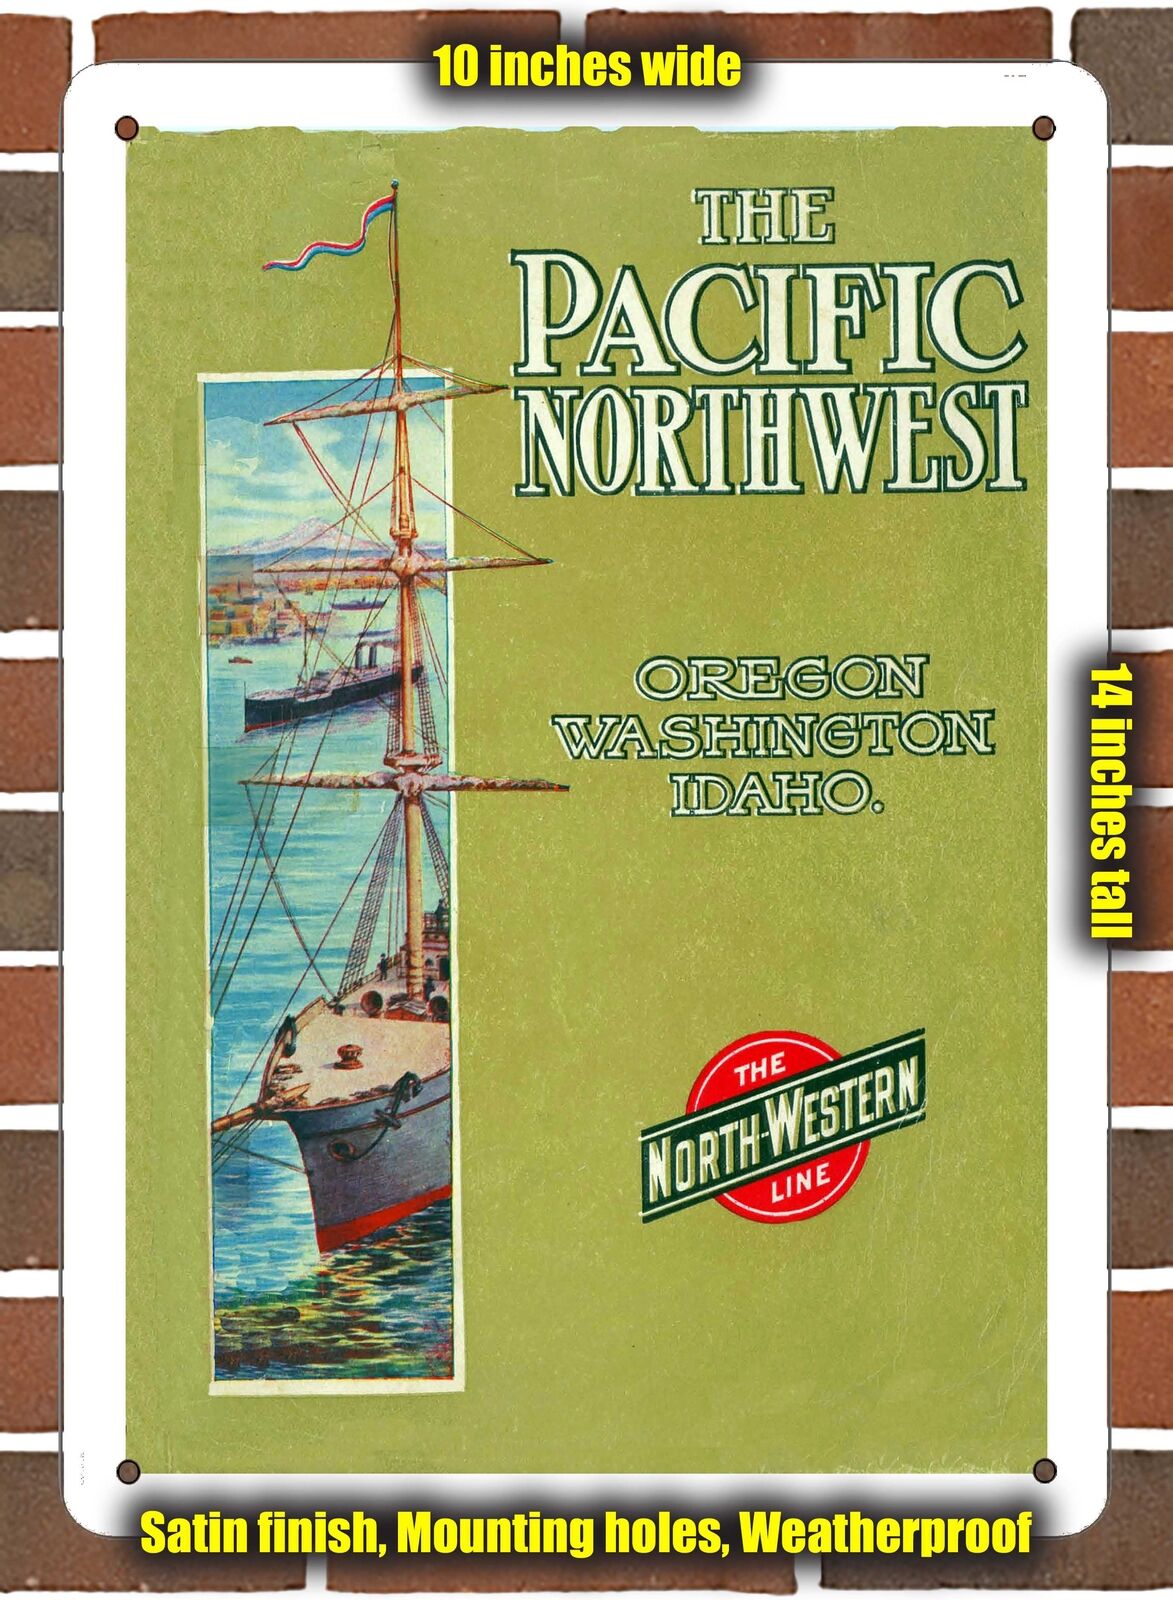 METAL SIGN - 1909 North-Western Line to Pacific Northwest - 10x14 inches